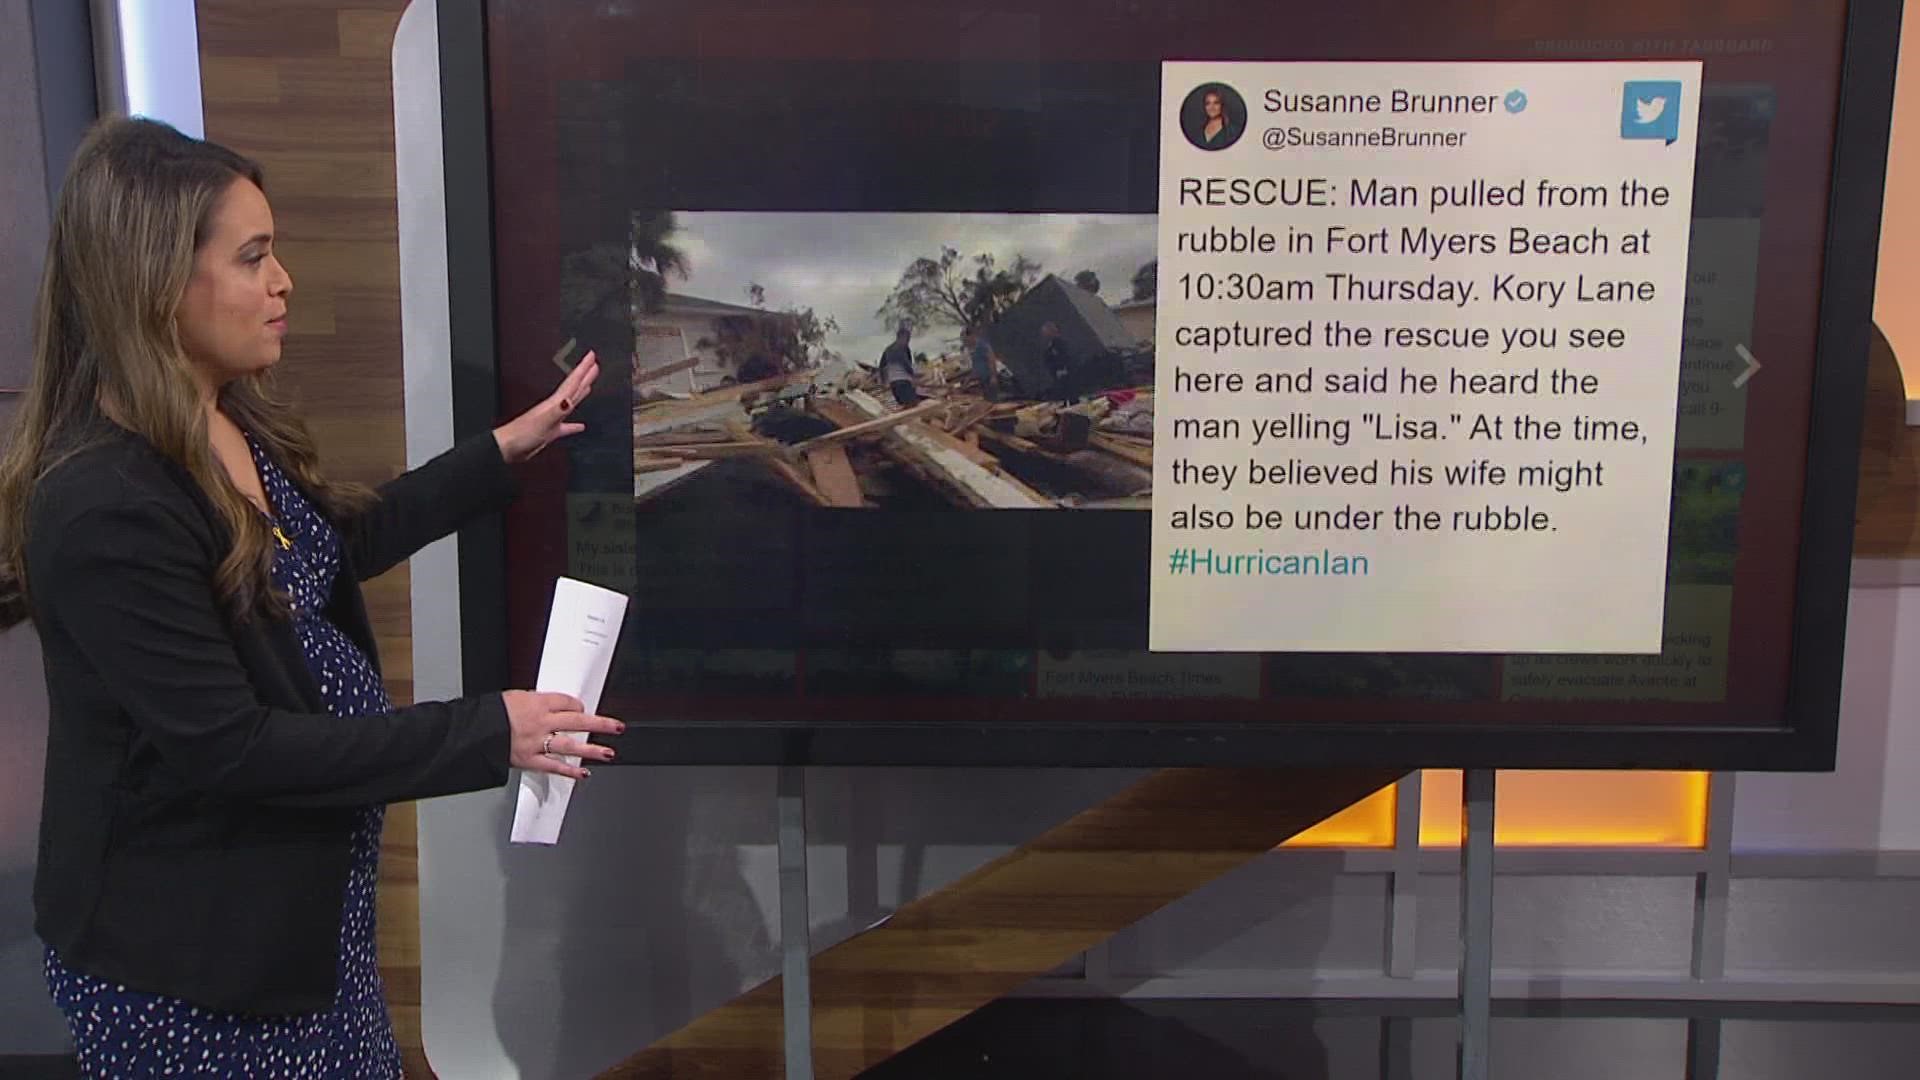 We're taking a look at the aftermath and damage from Hurricane Ian.